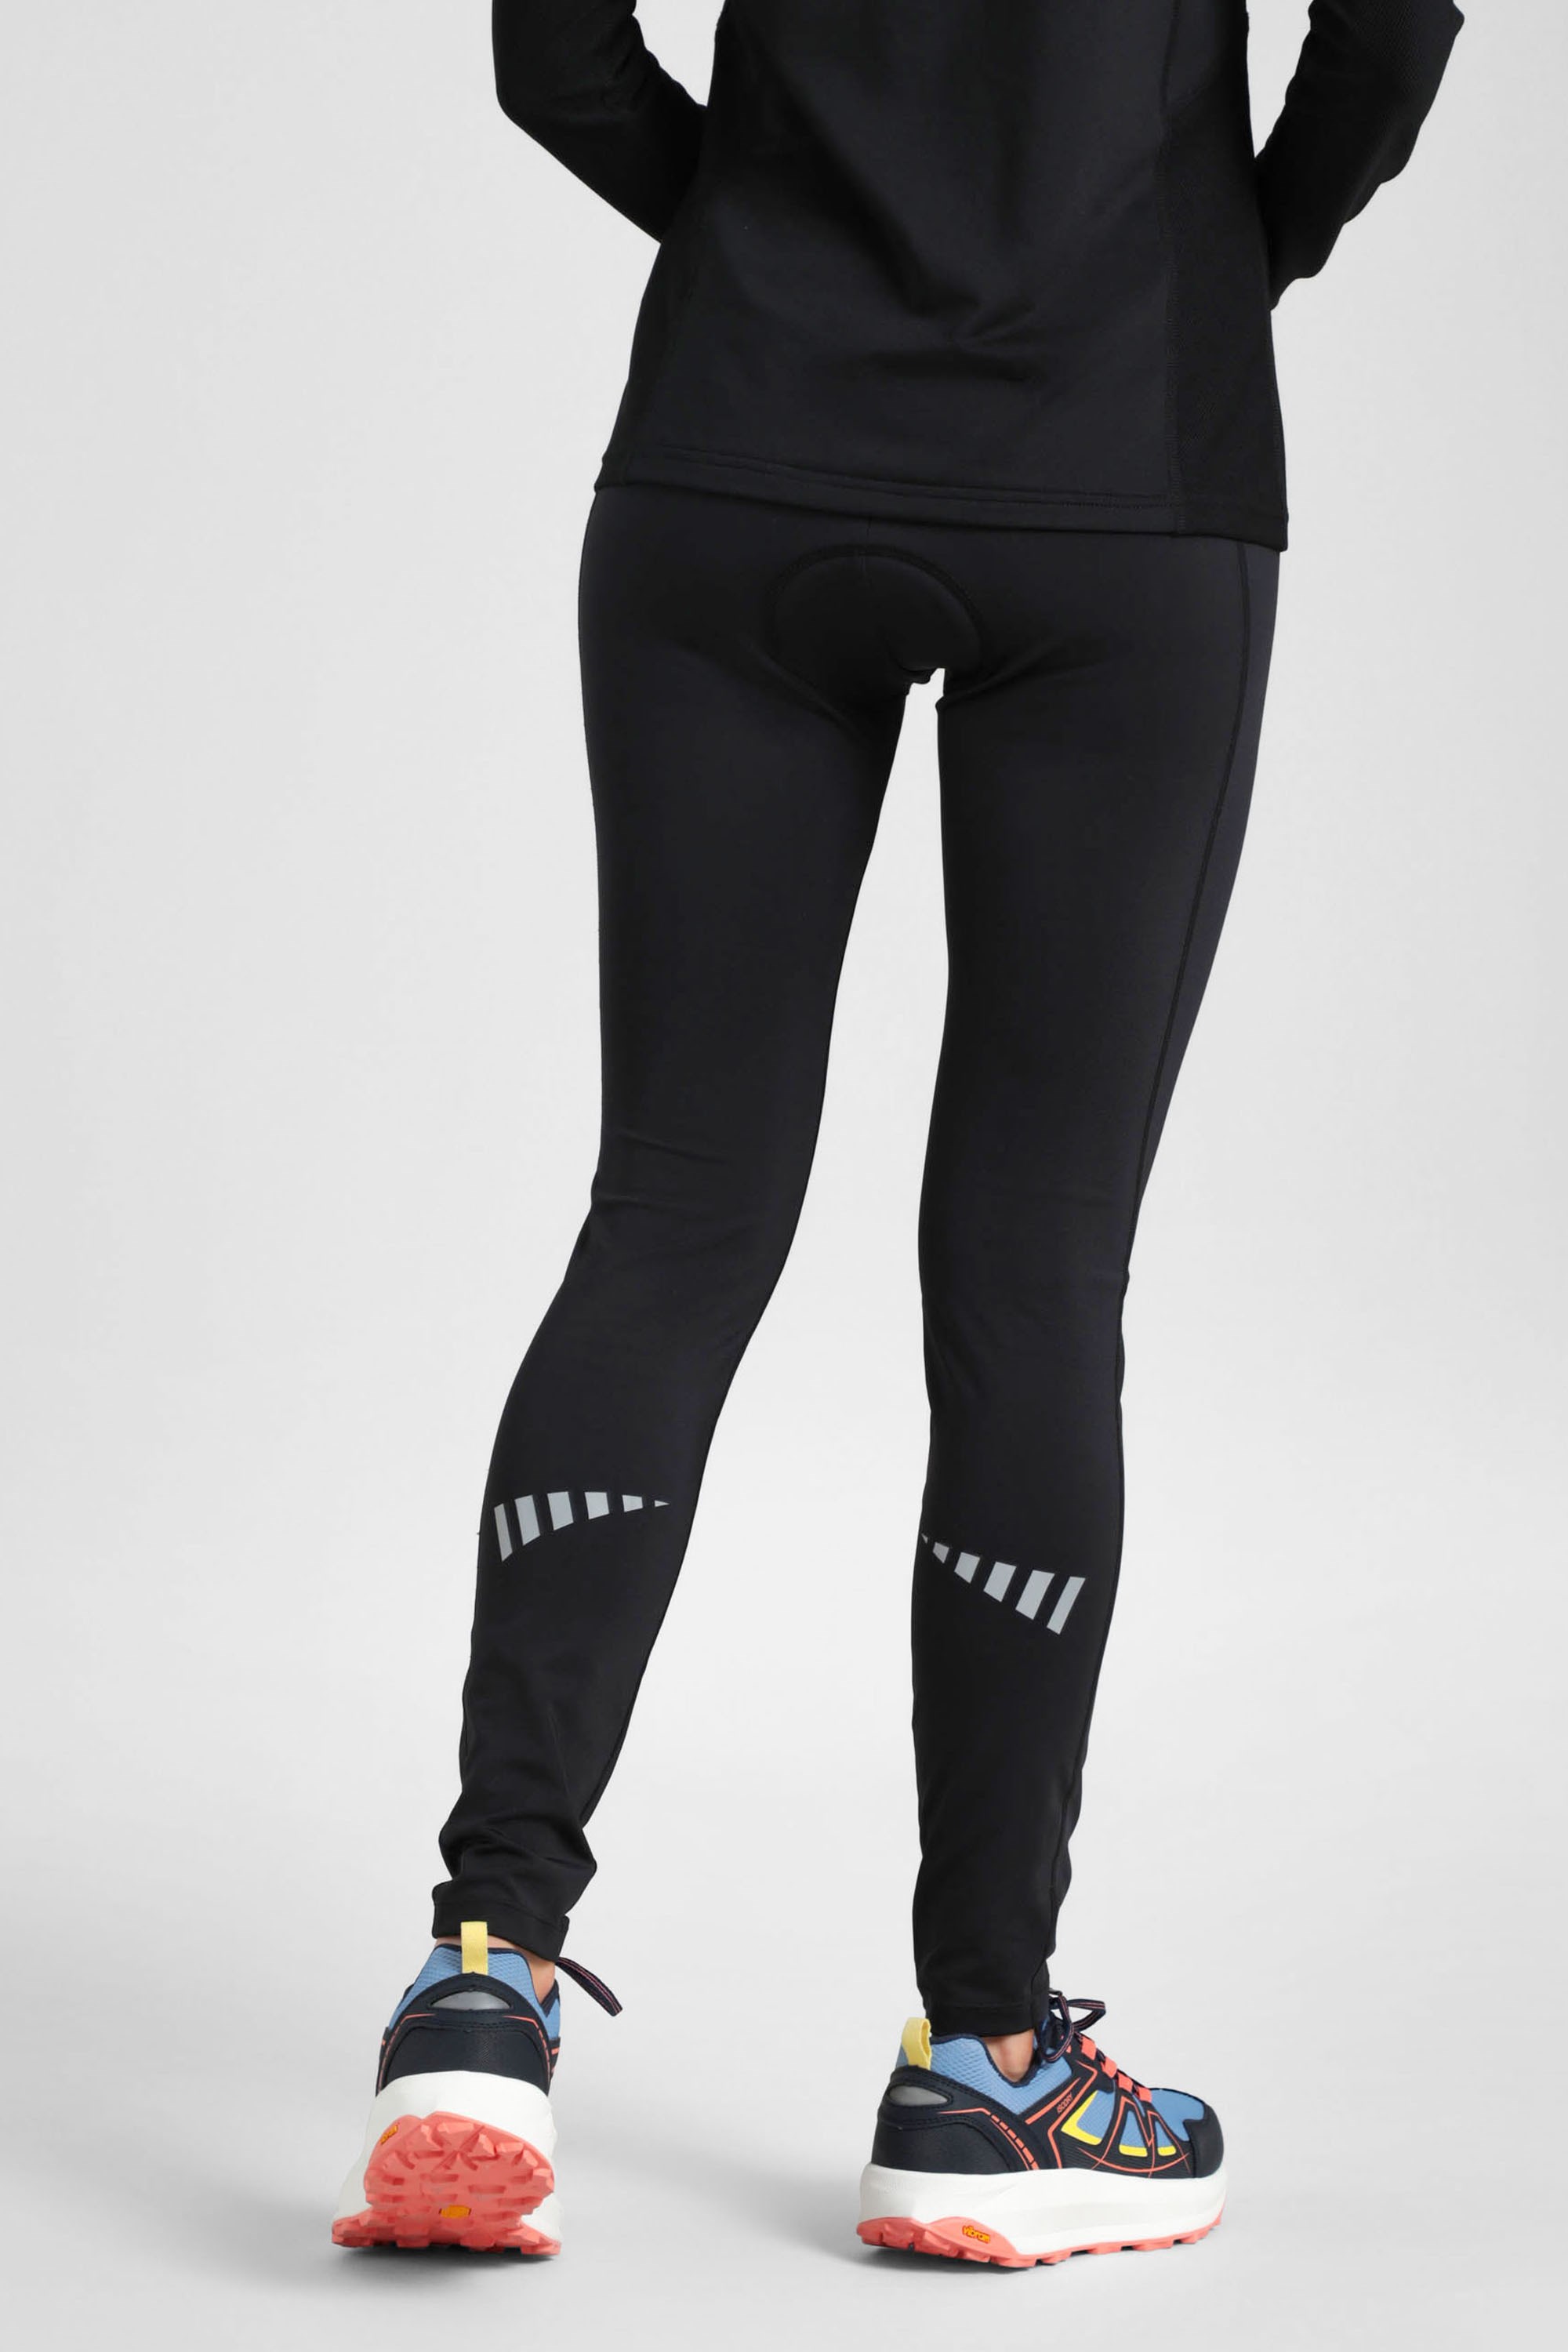 031169 SPEED UP WOMENS CYCLE FULL LENGTH LEGGING